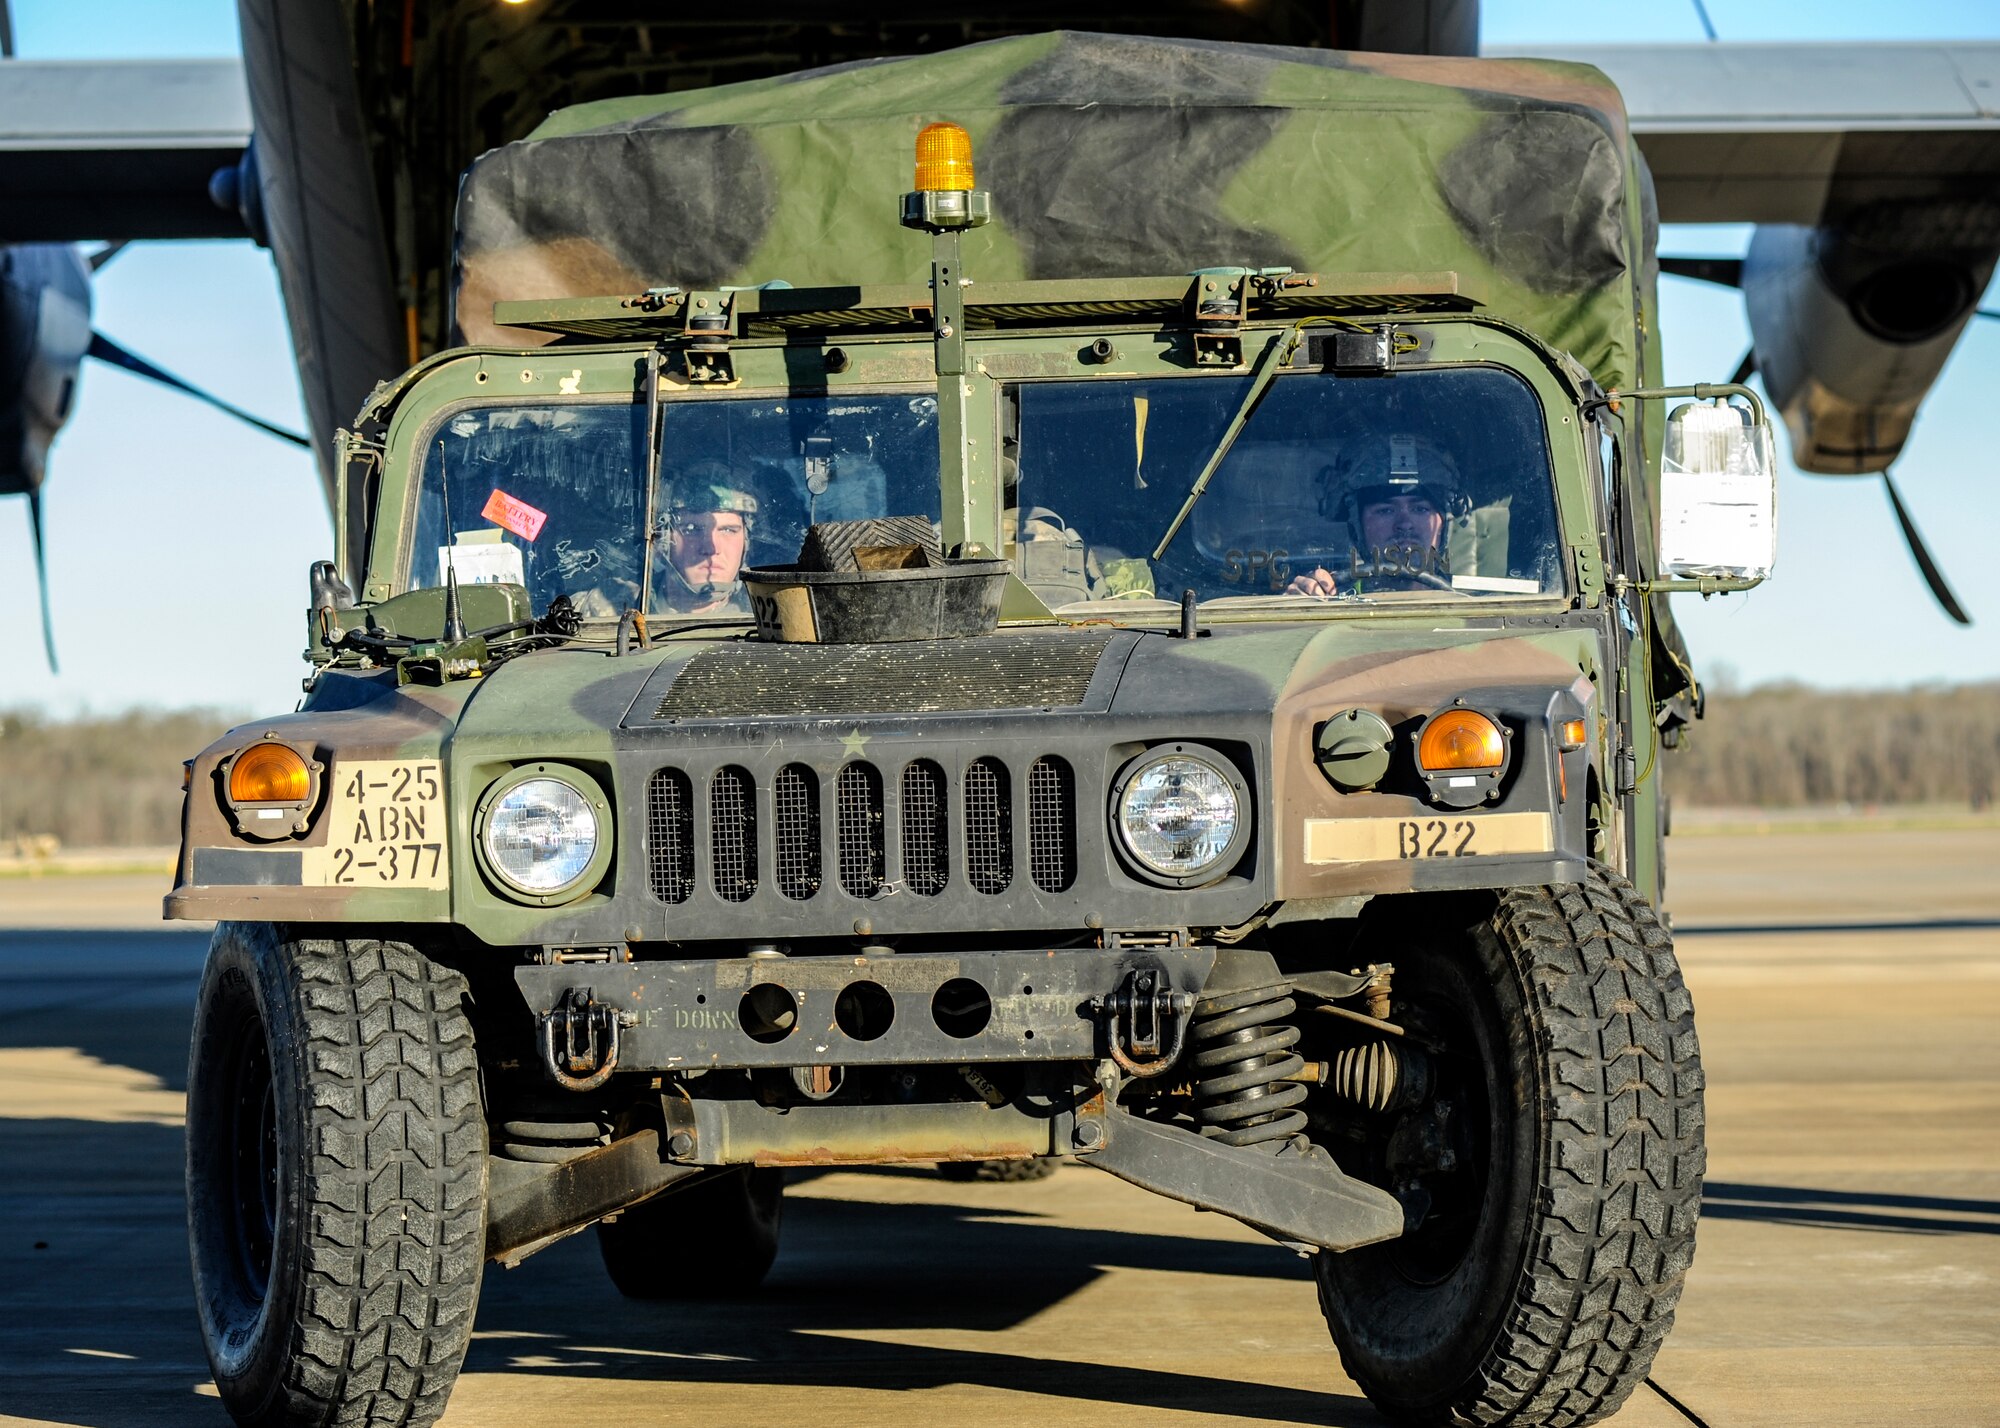 U.S. Army Soldiers load a Humvee onto a C-130J from Dyess Air Force Base, Texas, during GREEN FLAG 16-04, Feb. 17, 2016, near Fort Polk, La. U.S. Air Force Airmen worked hand-in-hand with Soldiers to load, unload and drop various cargo during the large-scale air mobility exercise. (U.S. Air Force photo/Senior Airman Harry Brexel)